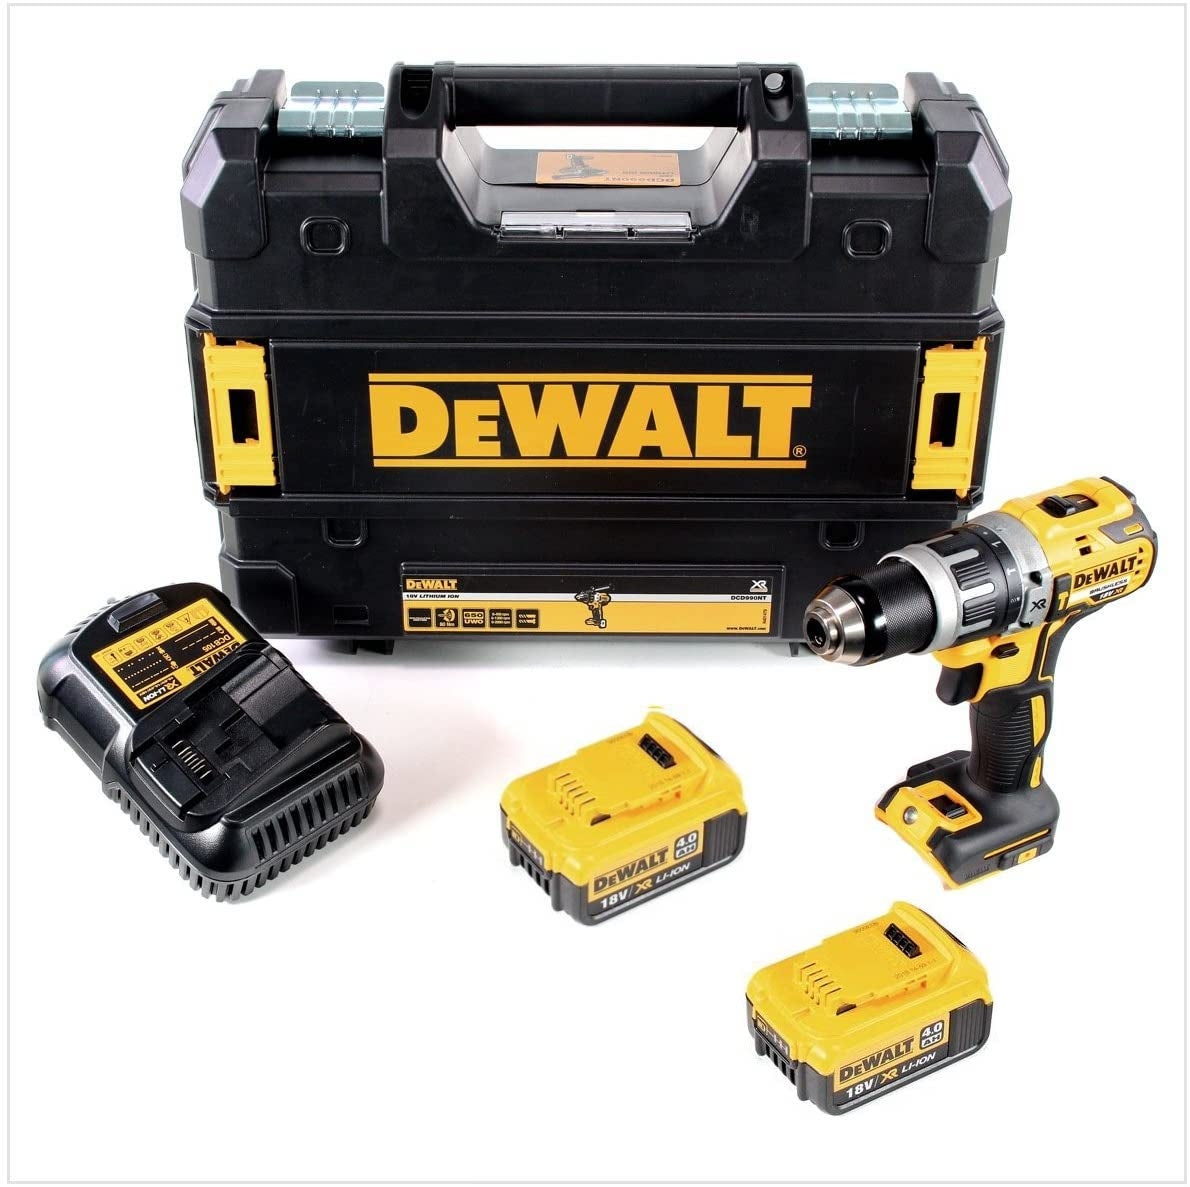 DeWalt DCD796M2 18V XR Brushless Compact Combi Drill with 2 x 4Ah Lithium-Ion Batteries